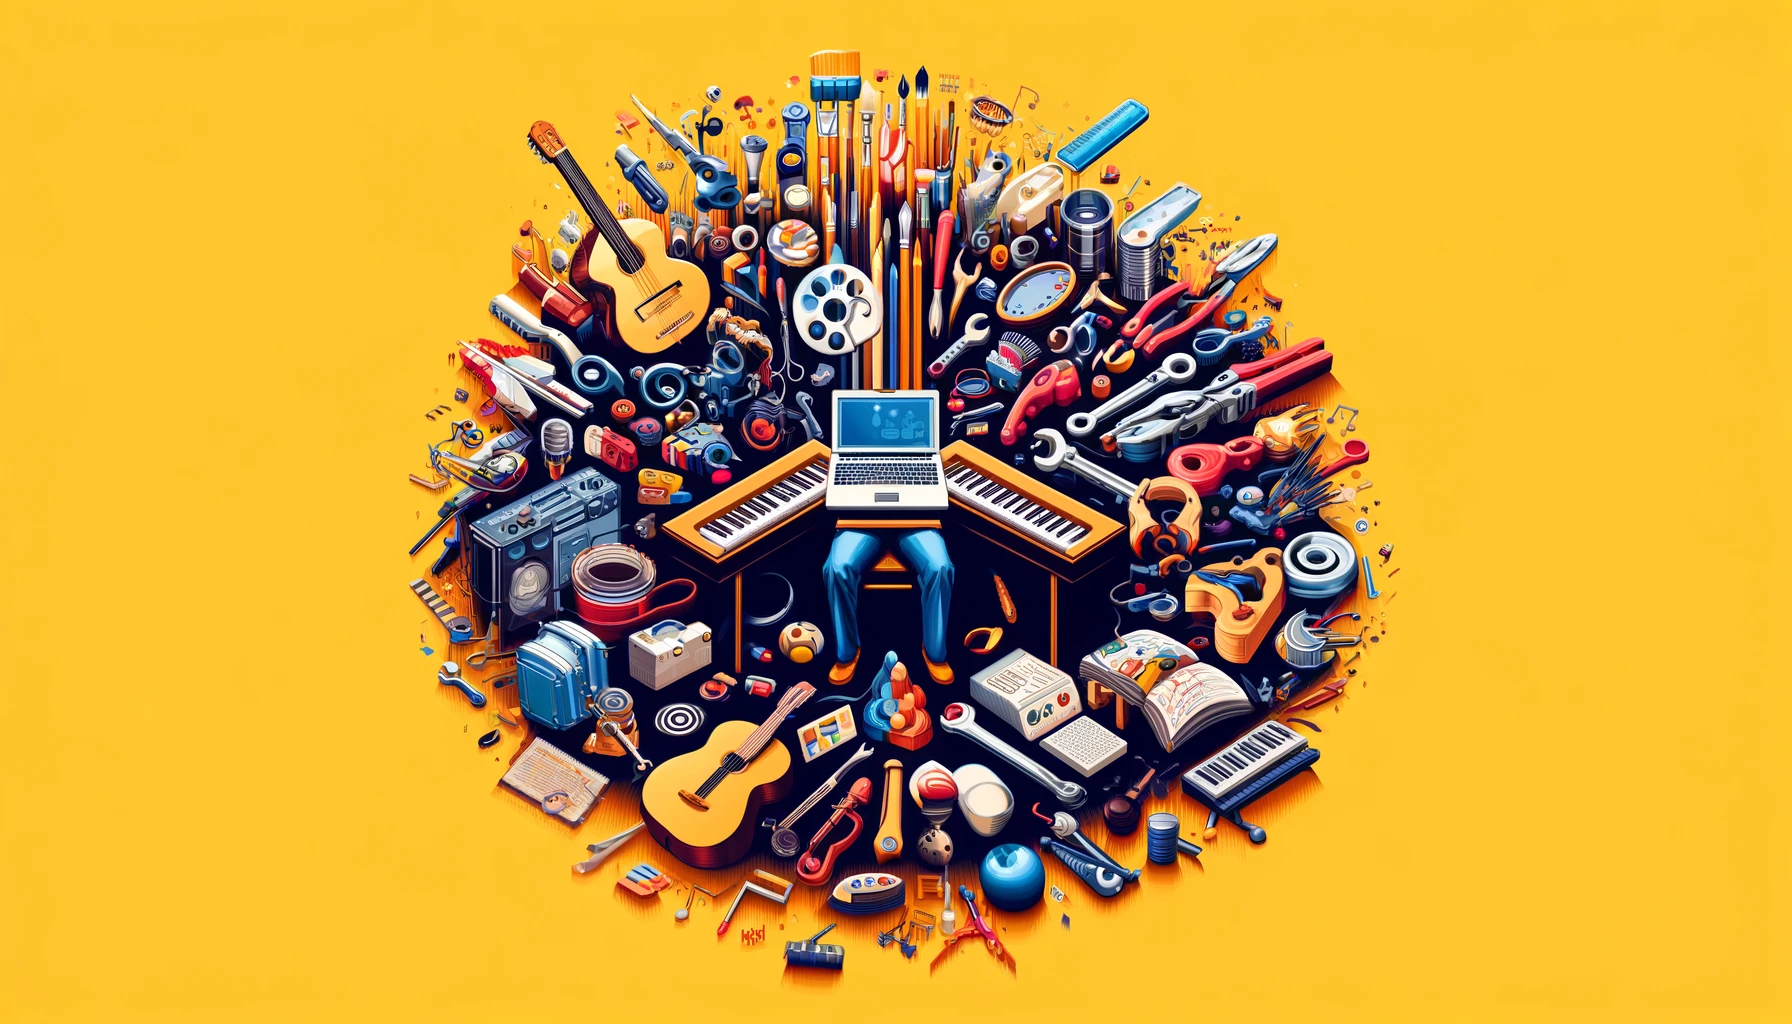 Illustration of a laptop with legs, surrounded by an assortment of musical instruments, tools, toolboxes, books and paintbrushes.